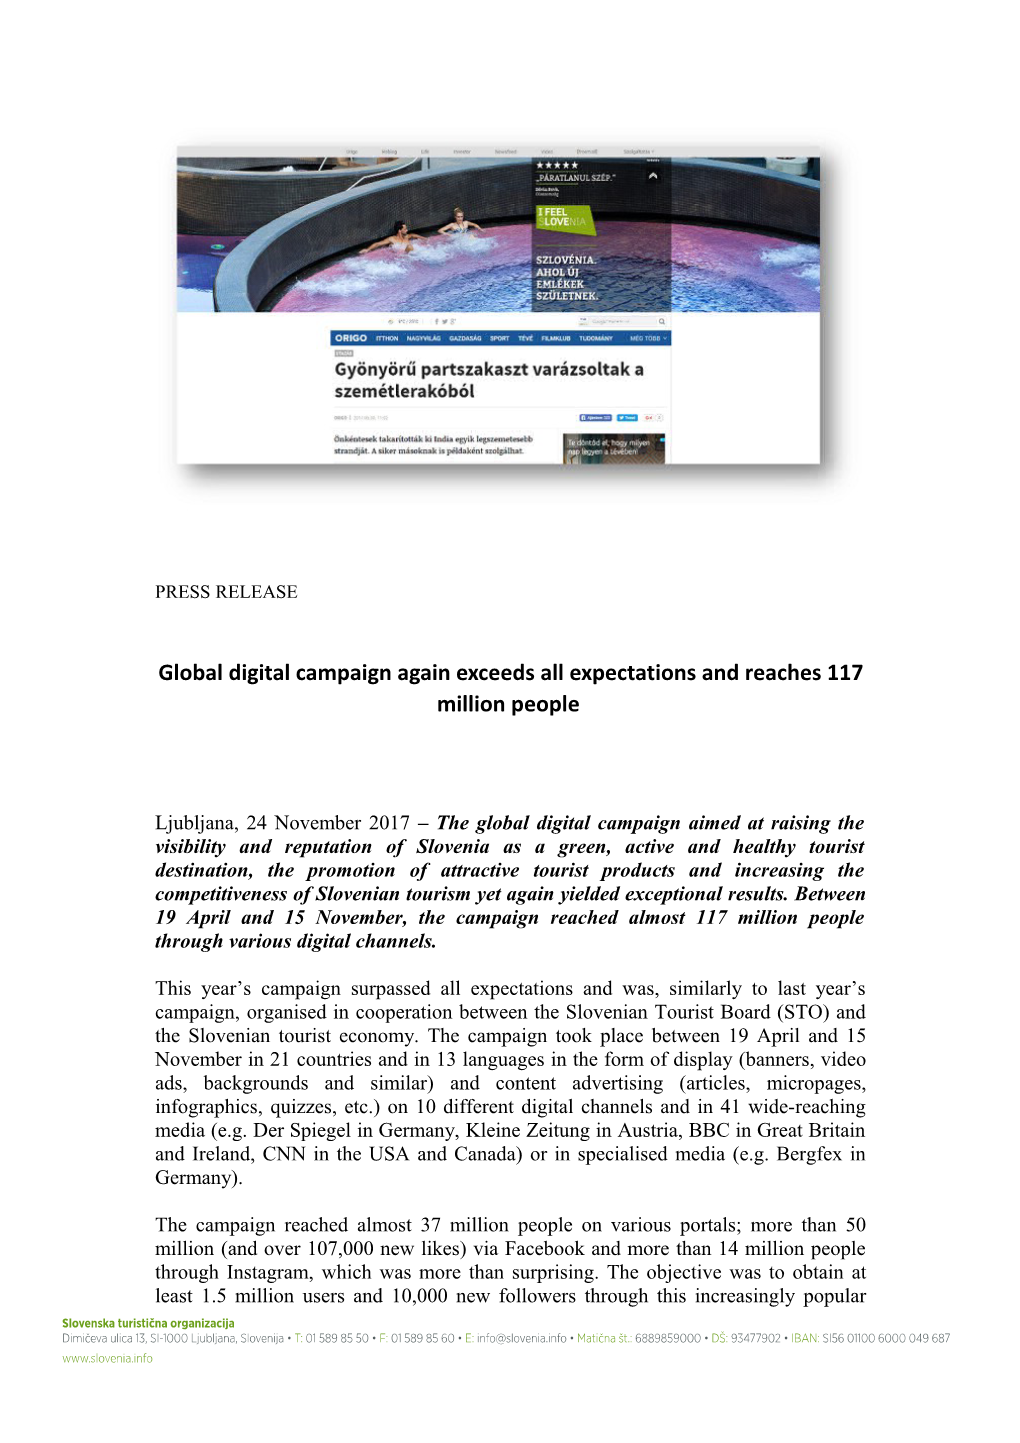 Global Digital Campaign Again Exceeds All Expectations and Reaches 117 Million People